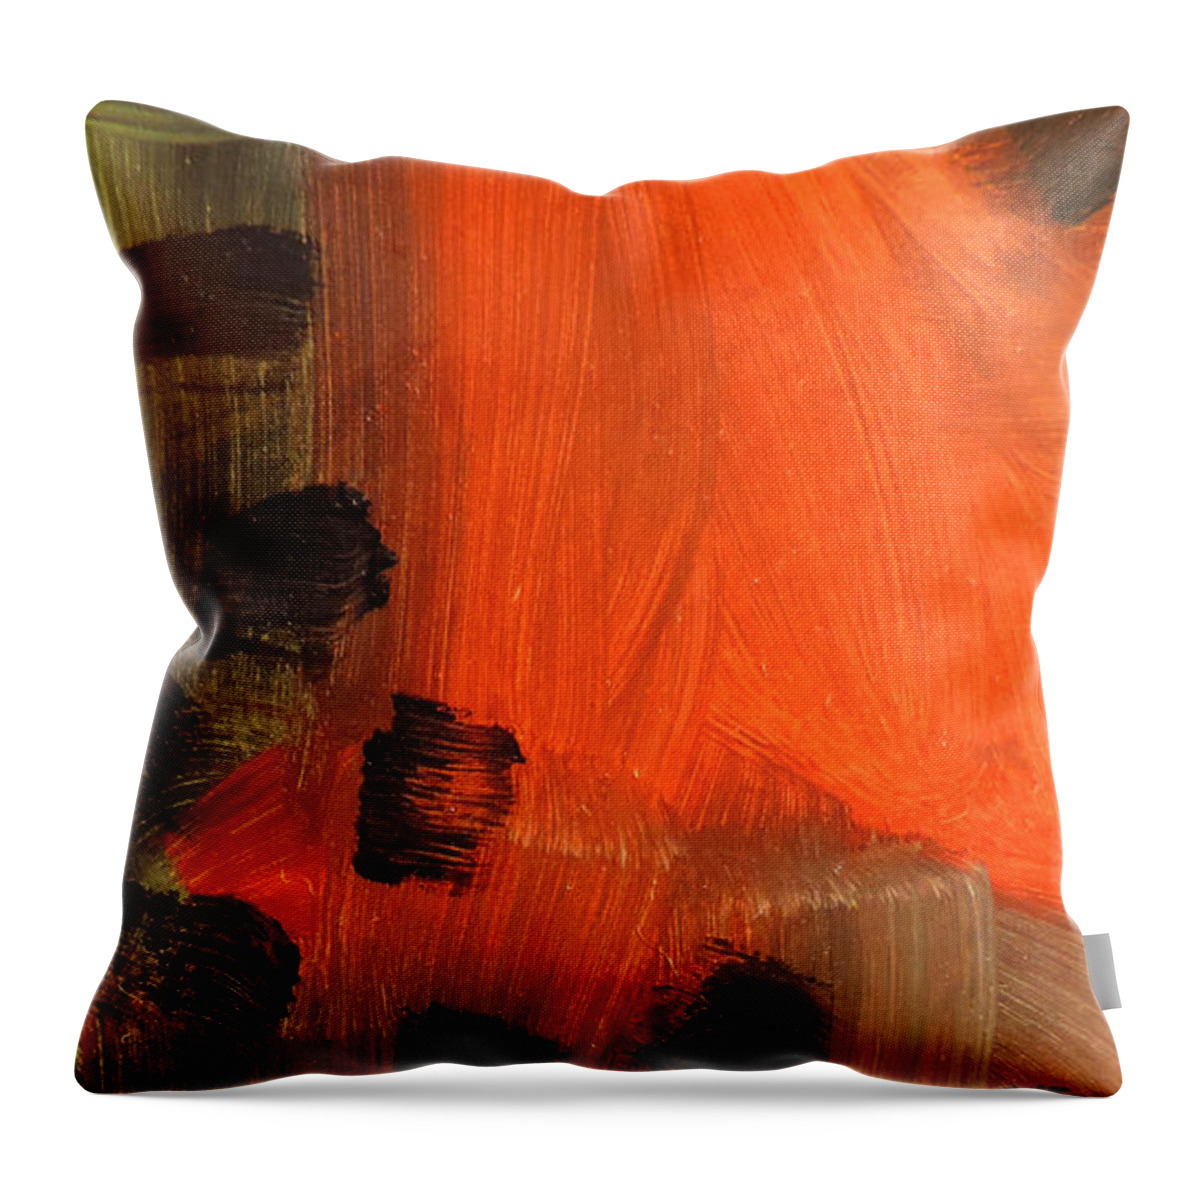 Abstract Design Decorative Modern Interior Design Bold Rich Color Art Fine Art Contemporary Decorate Throw Pillow featuring the painting Dante's Inferno by T S Carson